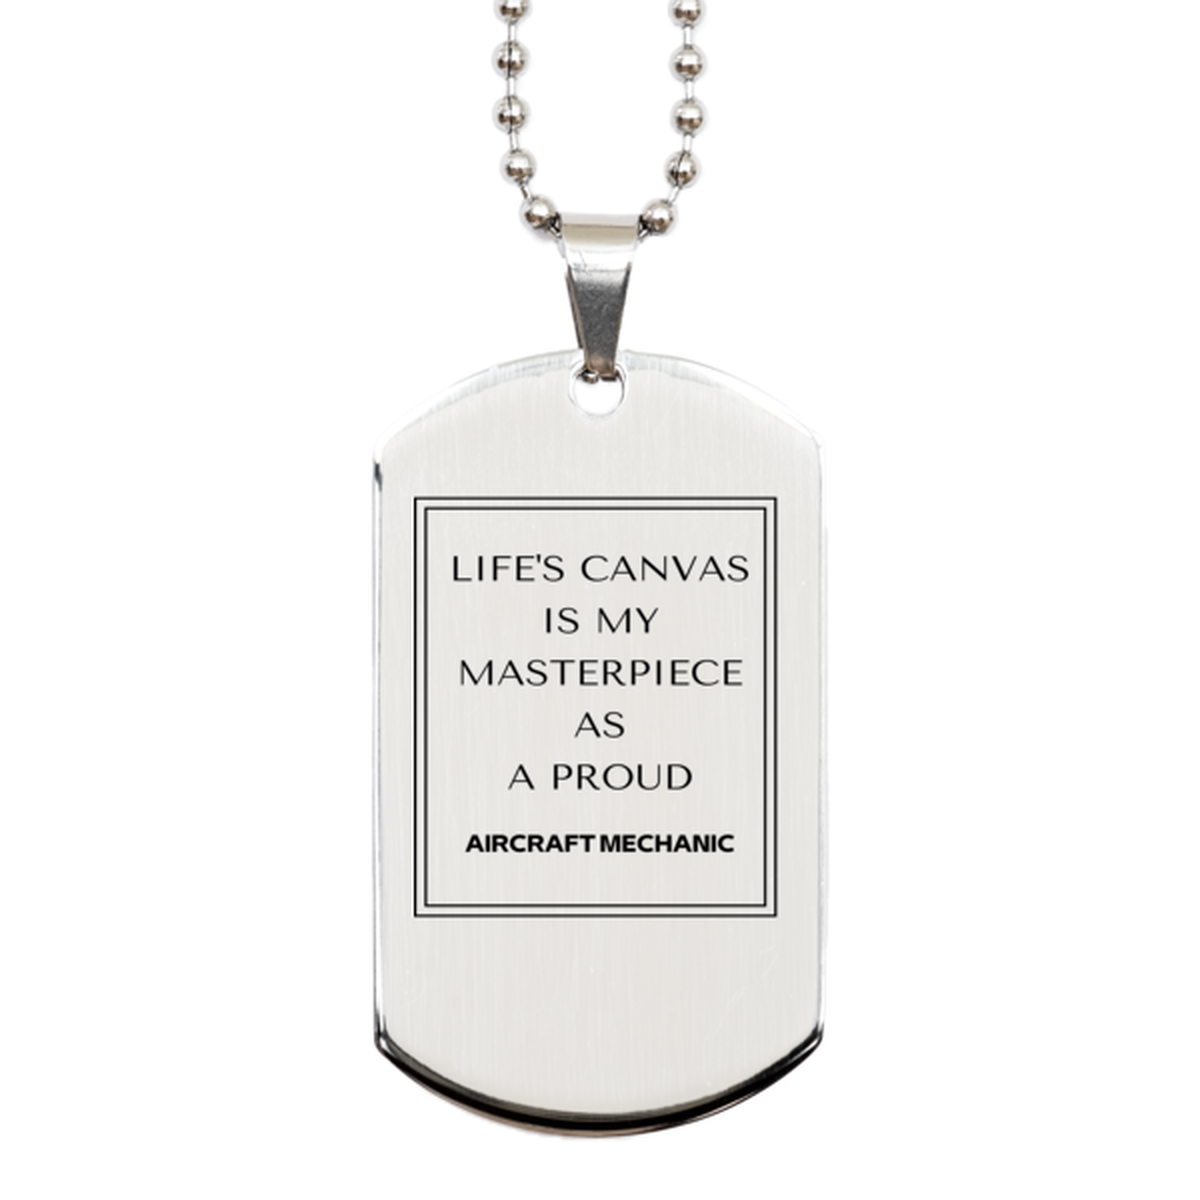 Proud Aircraft Mechanic Gifts, Life's canvas is my masterpiece, Epic Birthday Christmas Unique Silver Dog Tag For Aircraft Mechanic, Coworkers, Men, Women, Friends